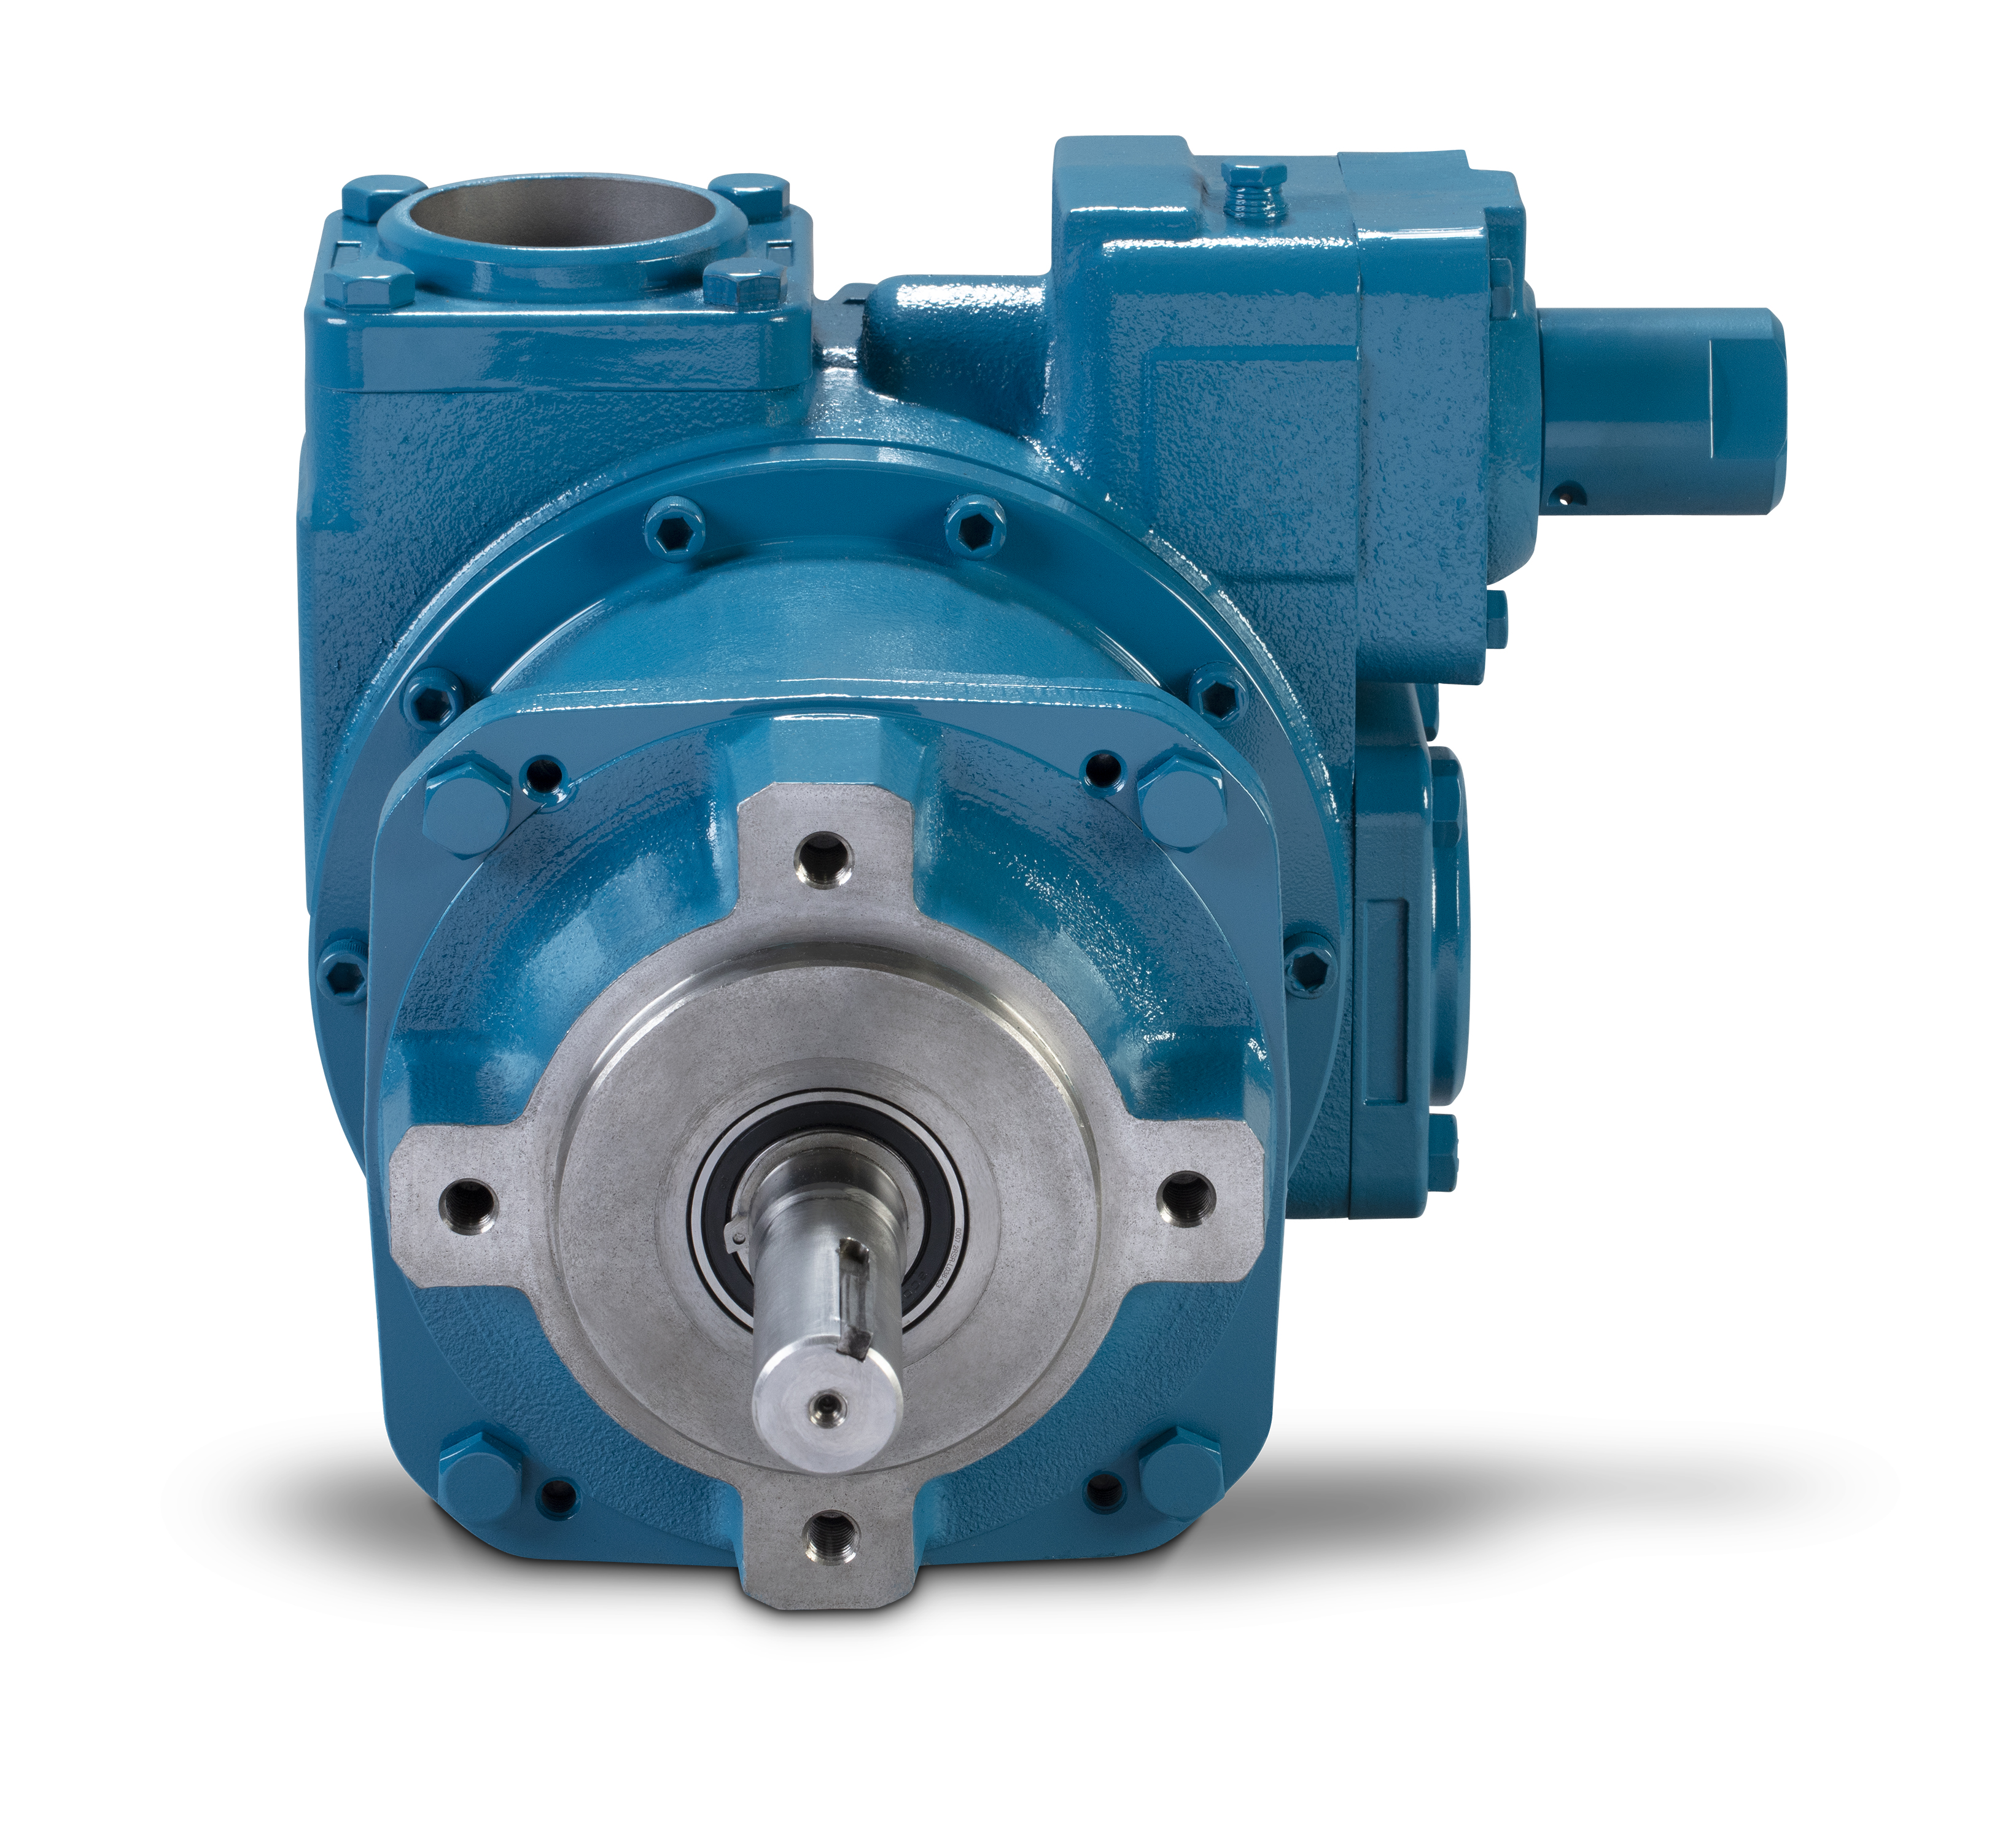 Blackmer's MAGNES Series sliding vane magnetic drive pumps are designed to address common problem areas.